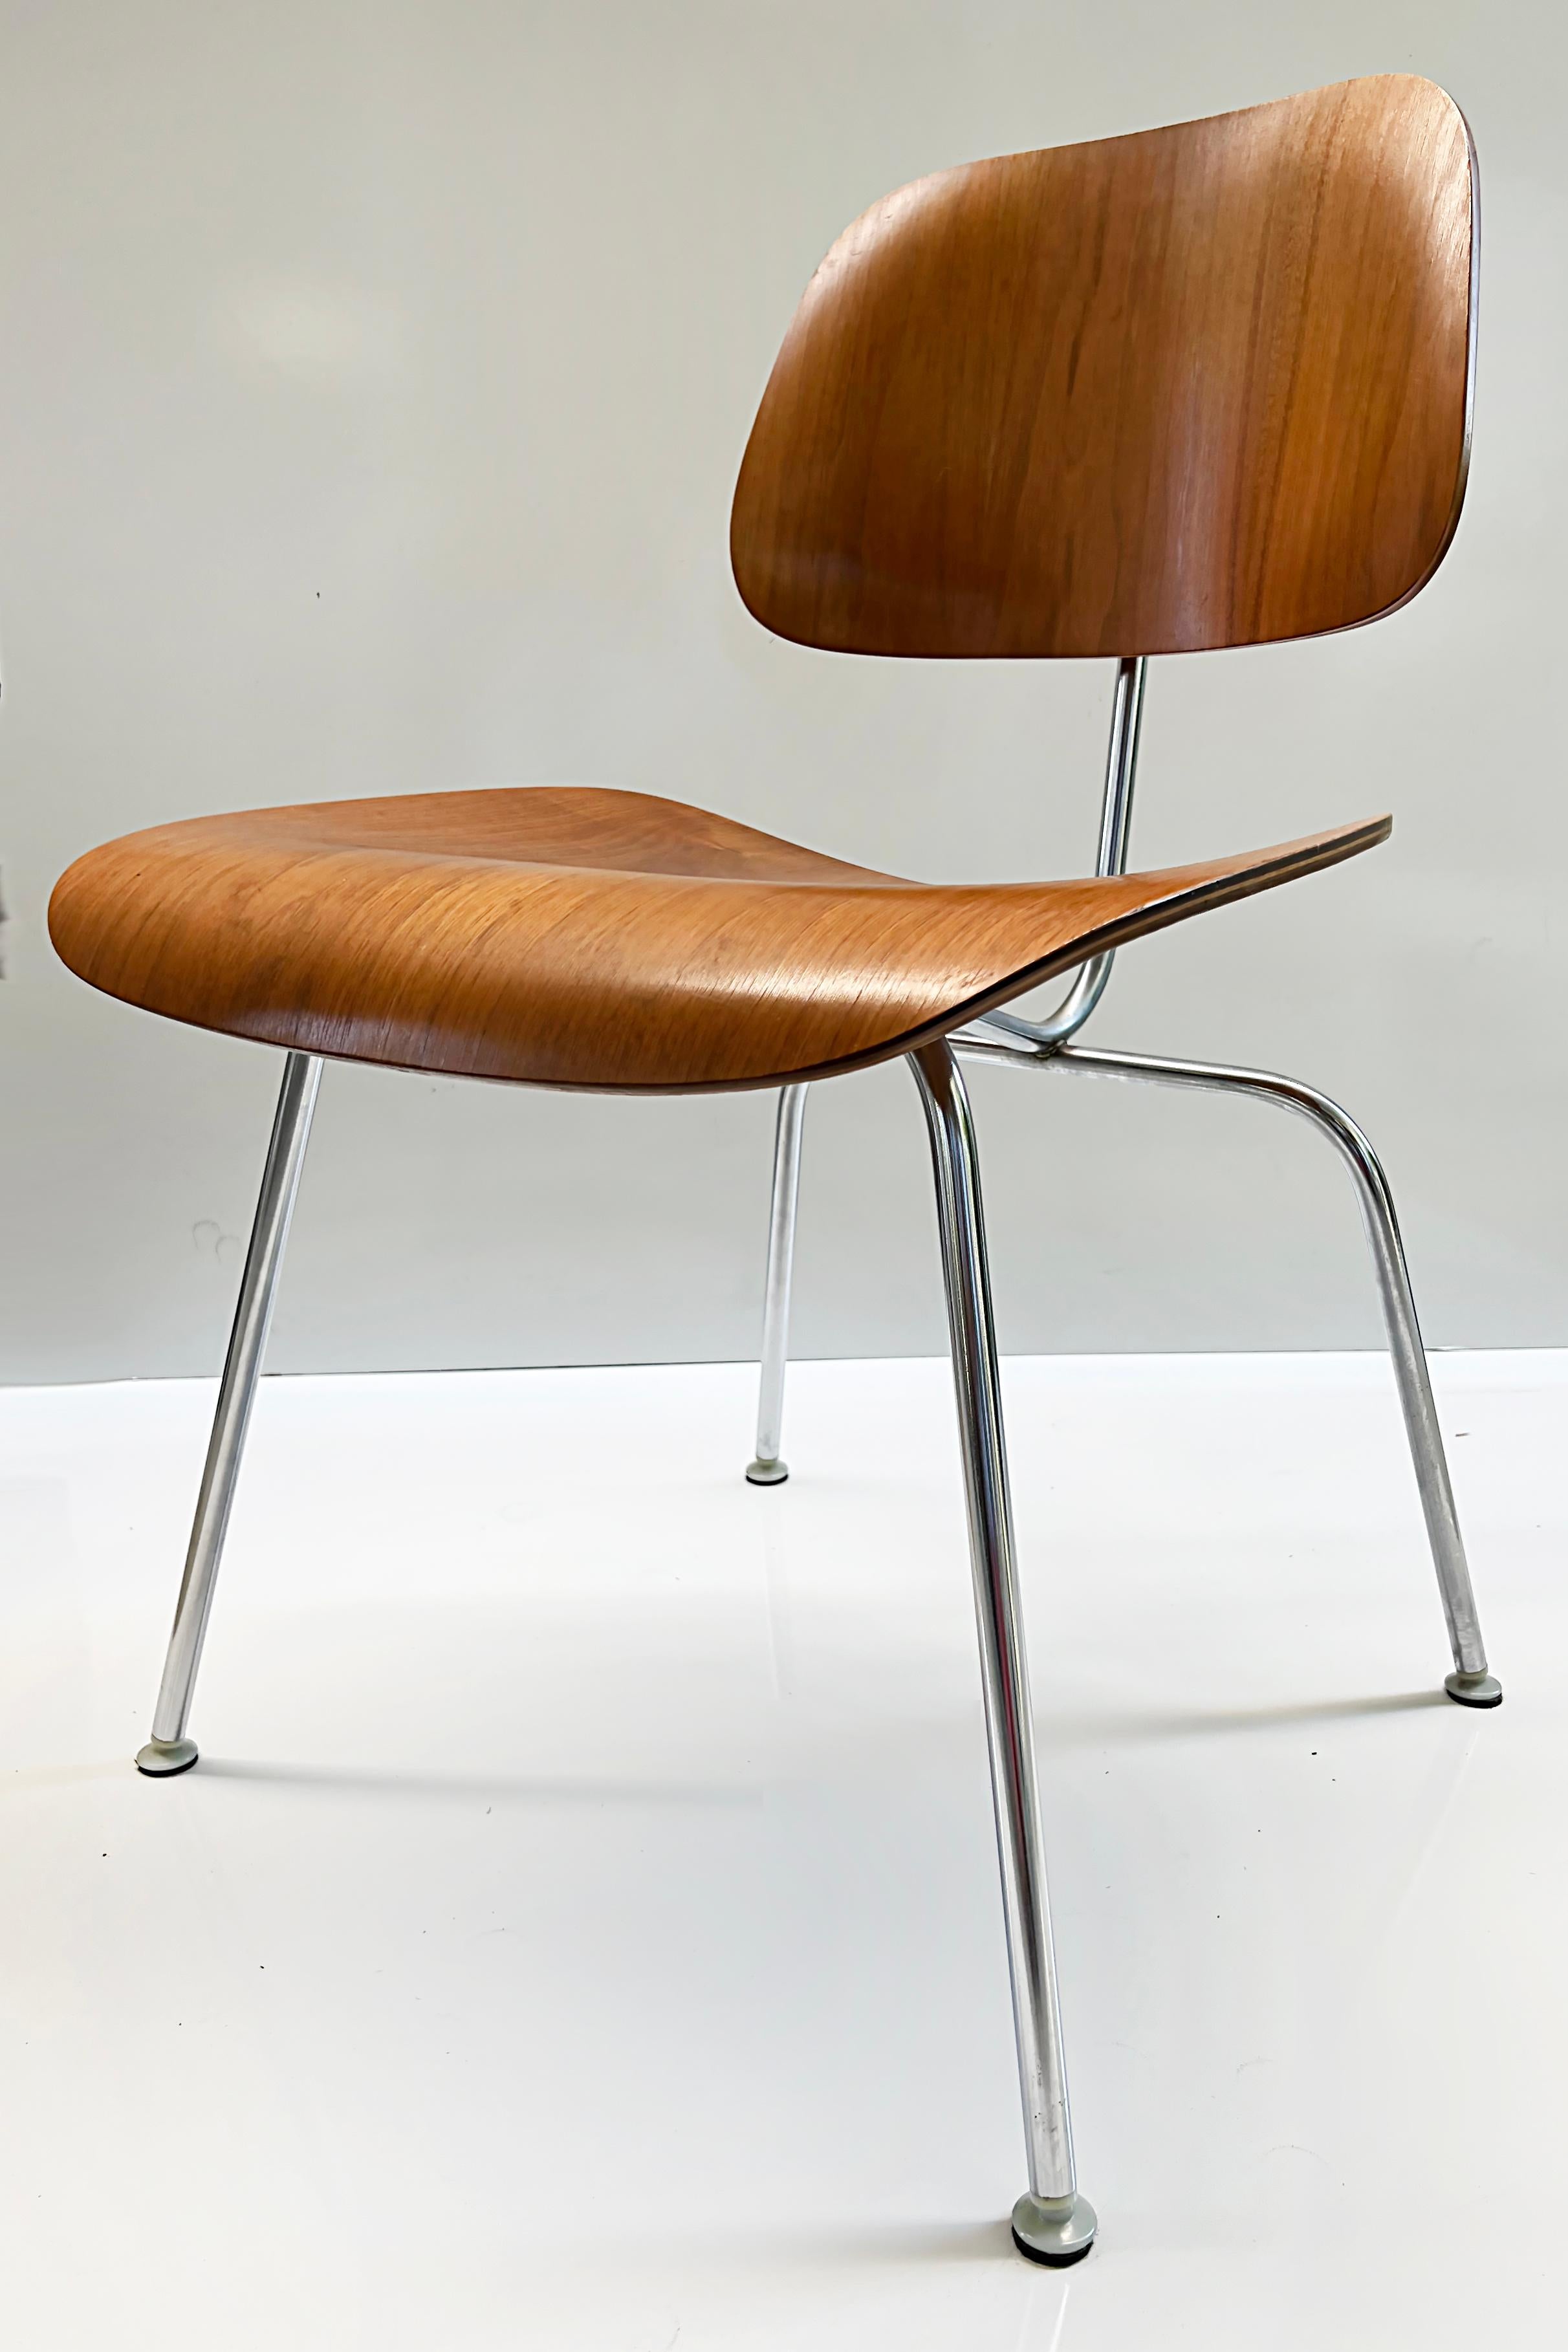 Mid-Century Modern 1950s Eames Molded Plywood Metal Base Dining Chairs DCM, Herman Miller, pair